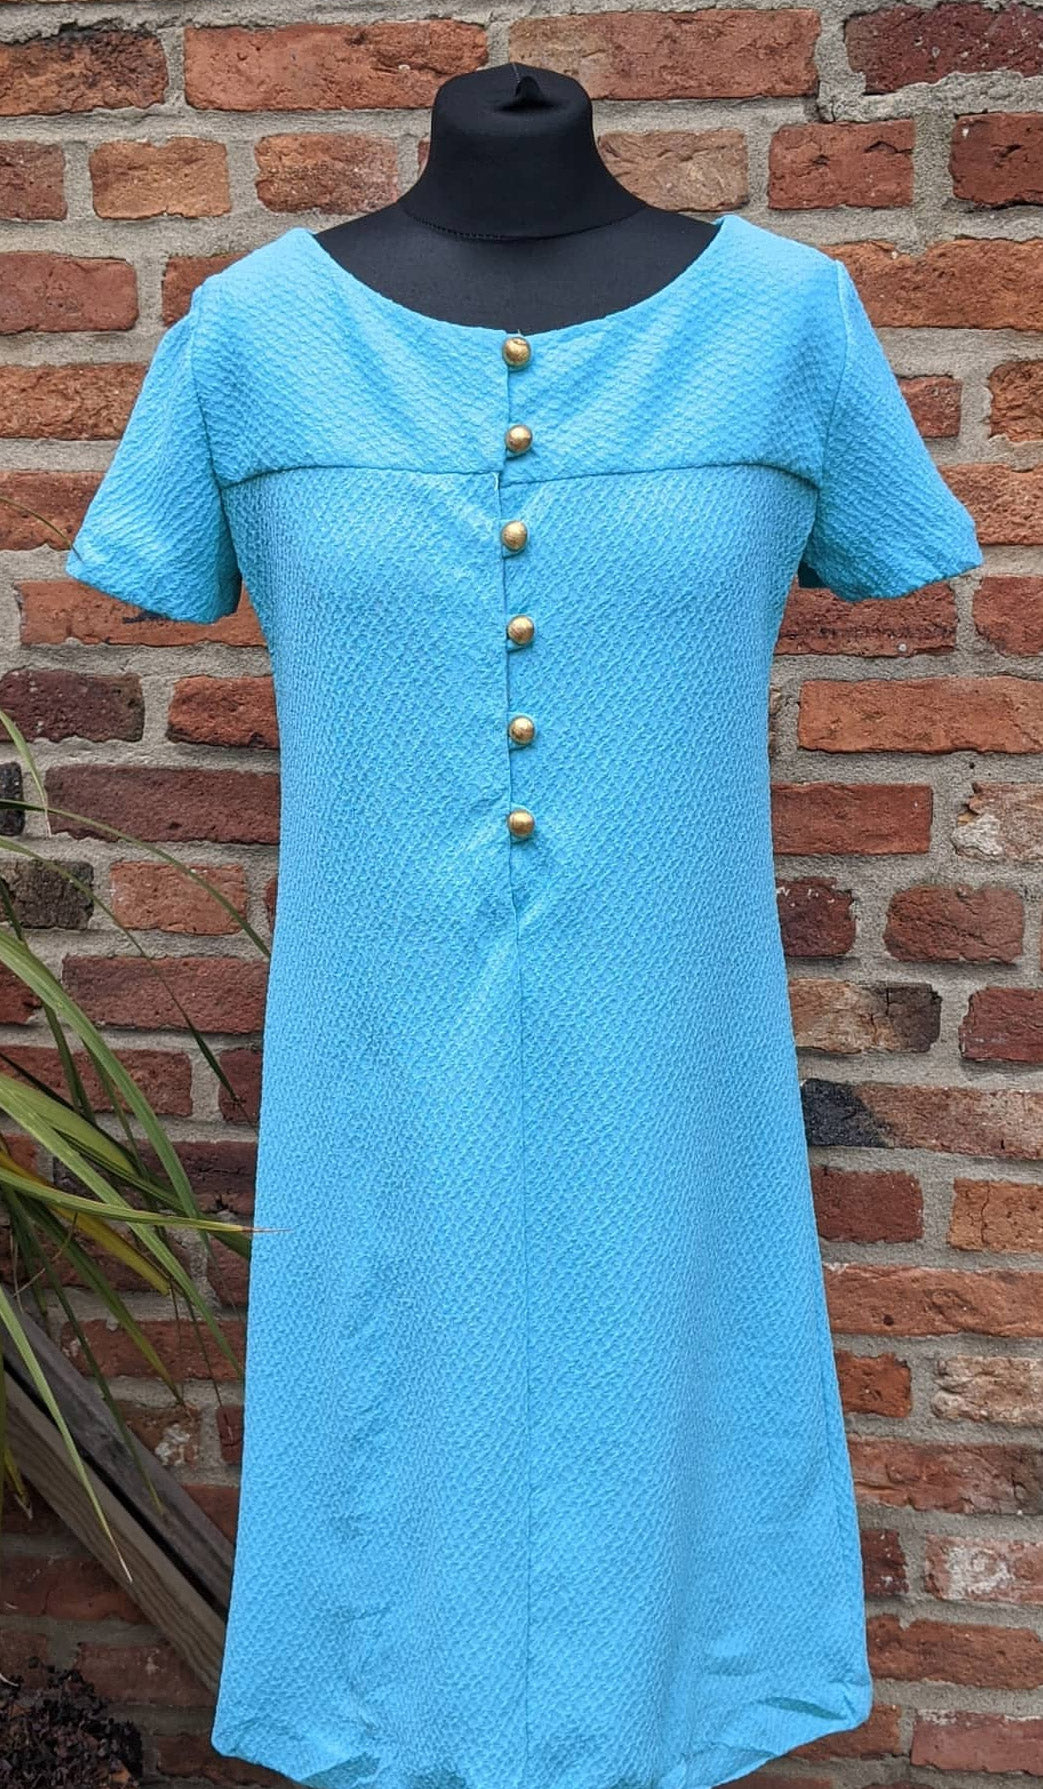 Vintage Californian 1960s textured dress approx size 12/14